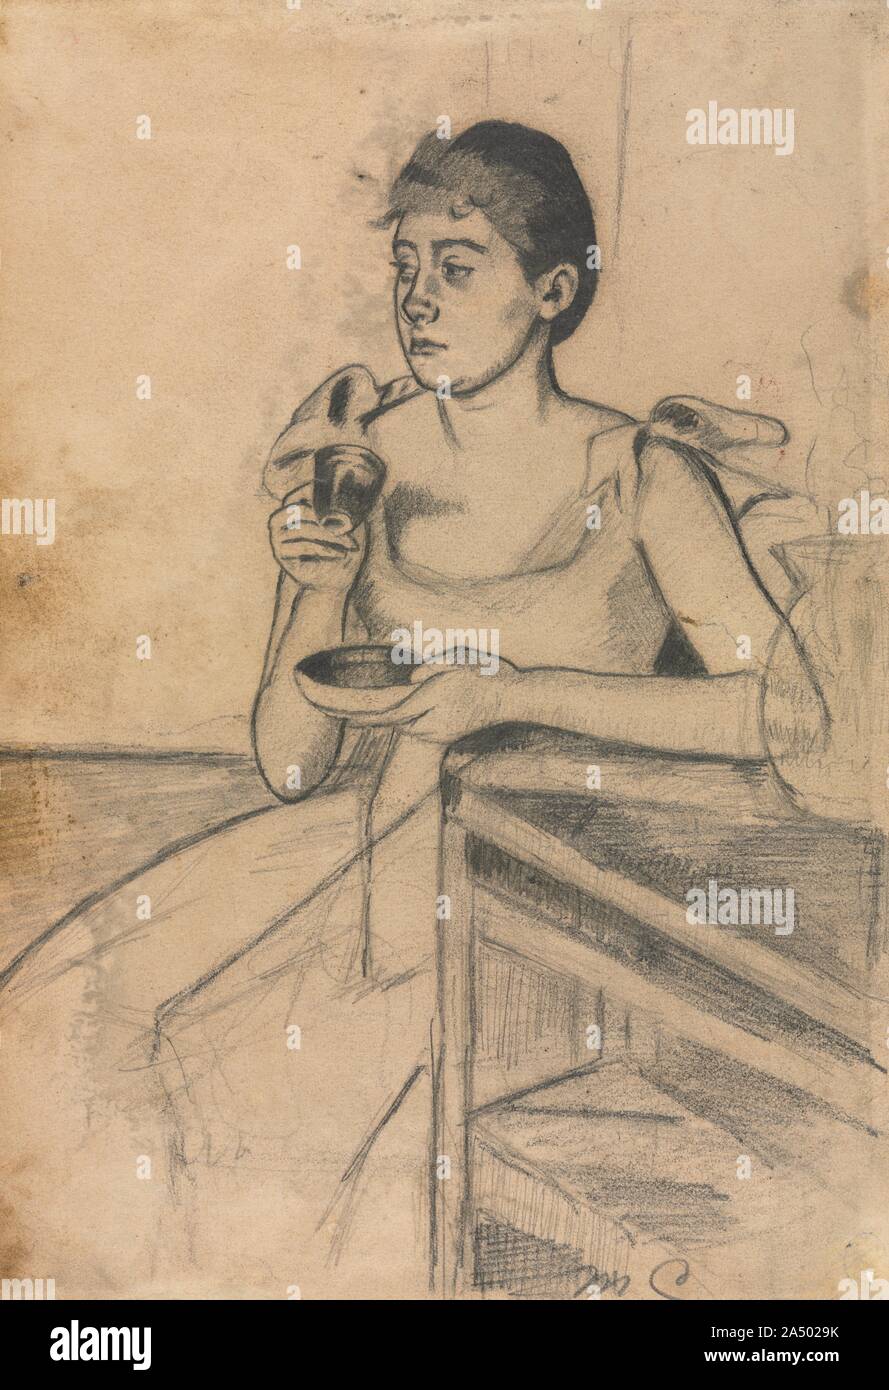 After-Dinner Coffee (recto), c. 1889. Cassatt exhibited prints for the first time in 1880 at the fifth Impressionist exhibition. As the decade progressed, she continued to show her graphic work alongside pastels and paintings. In the spring of 1890, at the Deuxi&#xe8;me Exposition de Peintres-Graveurs, she showed a group of drypoints, remarkable in their delicacy and precision, as well as a group of prints made with a combination of aquatint and softground etching that appeared quickly drawn and spontaneous. After-Dinner Coffee is a study for a softground etching with aquatint. Stock Photo